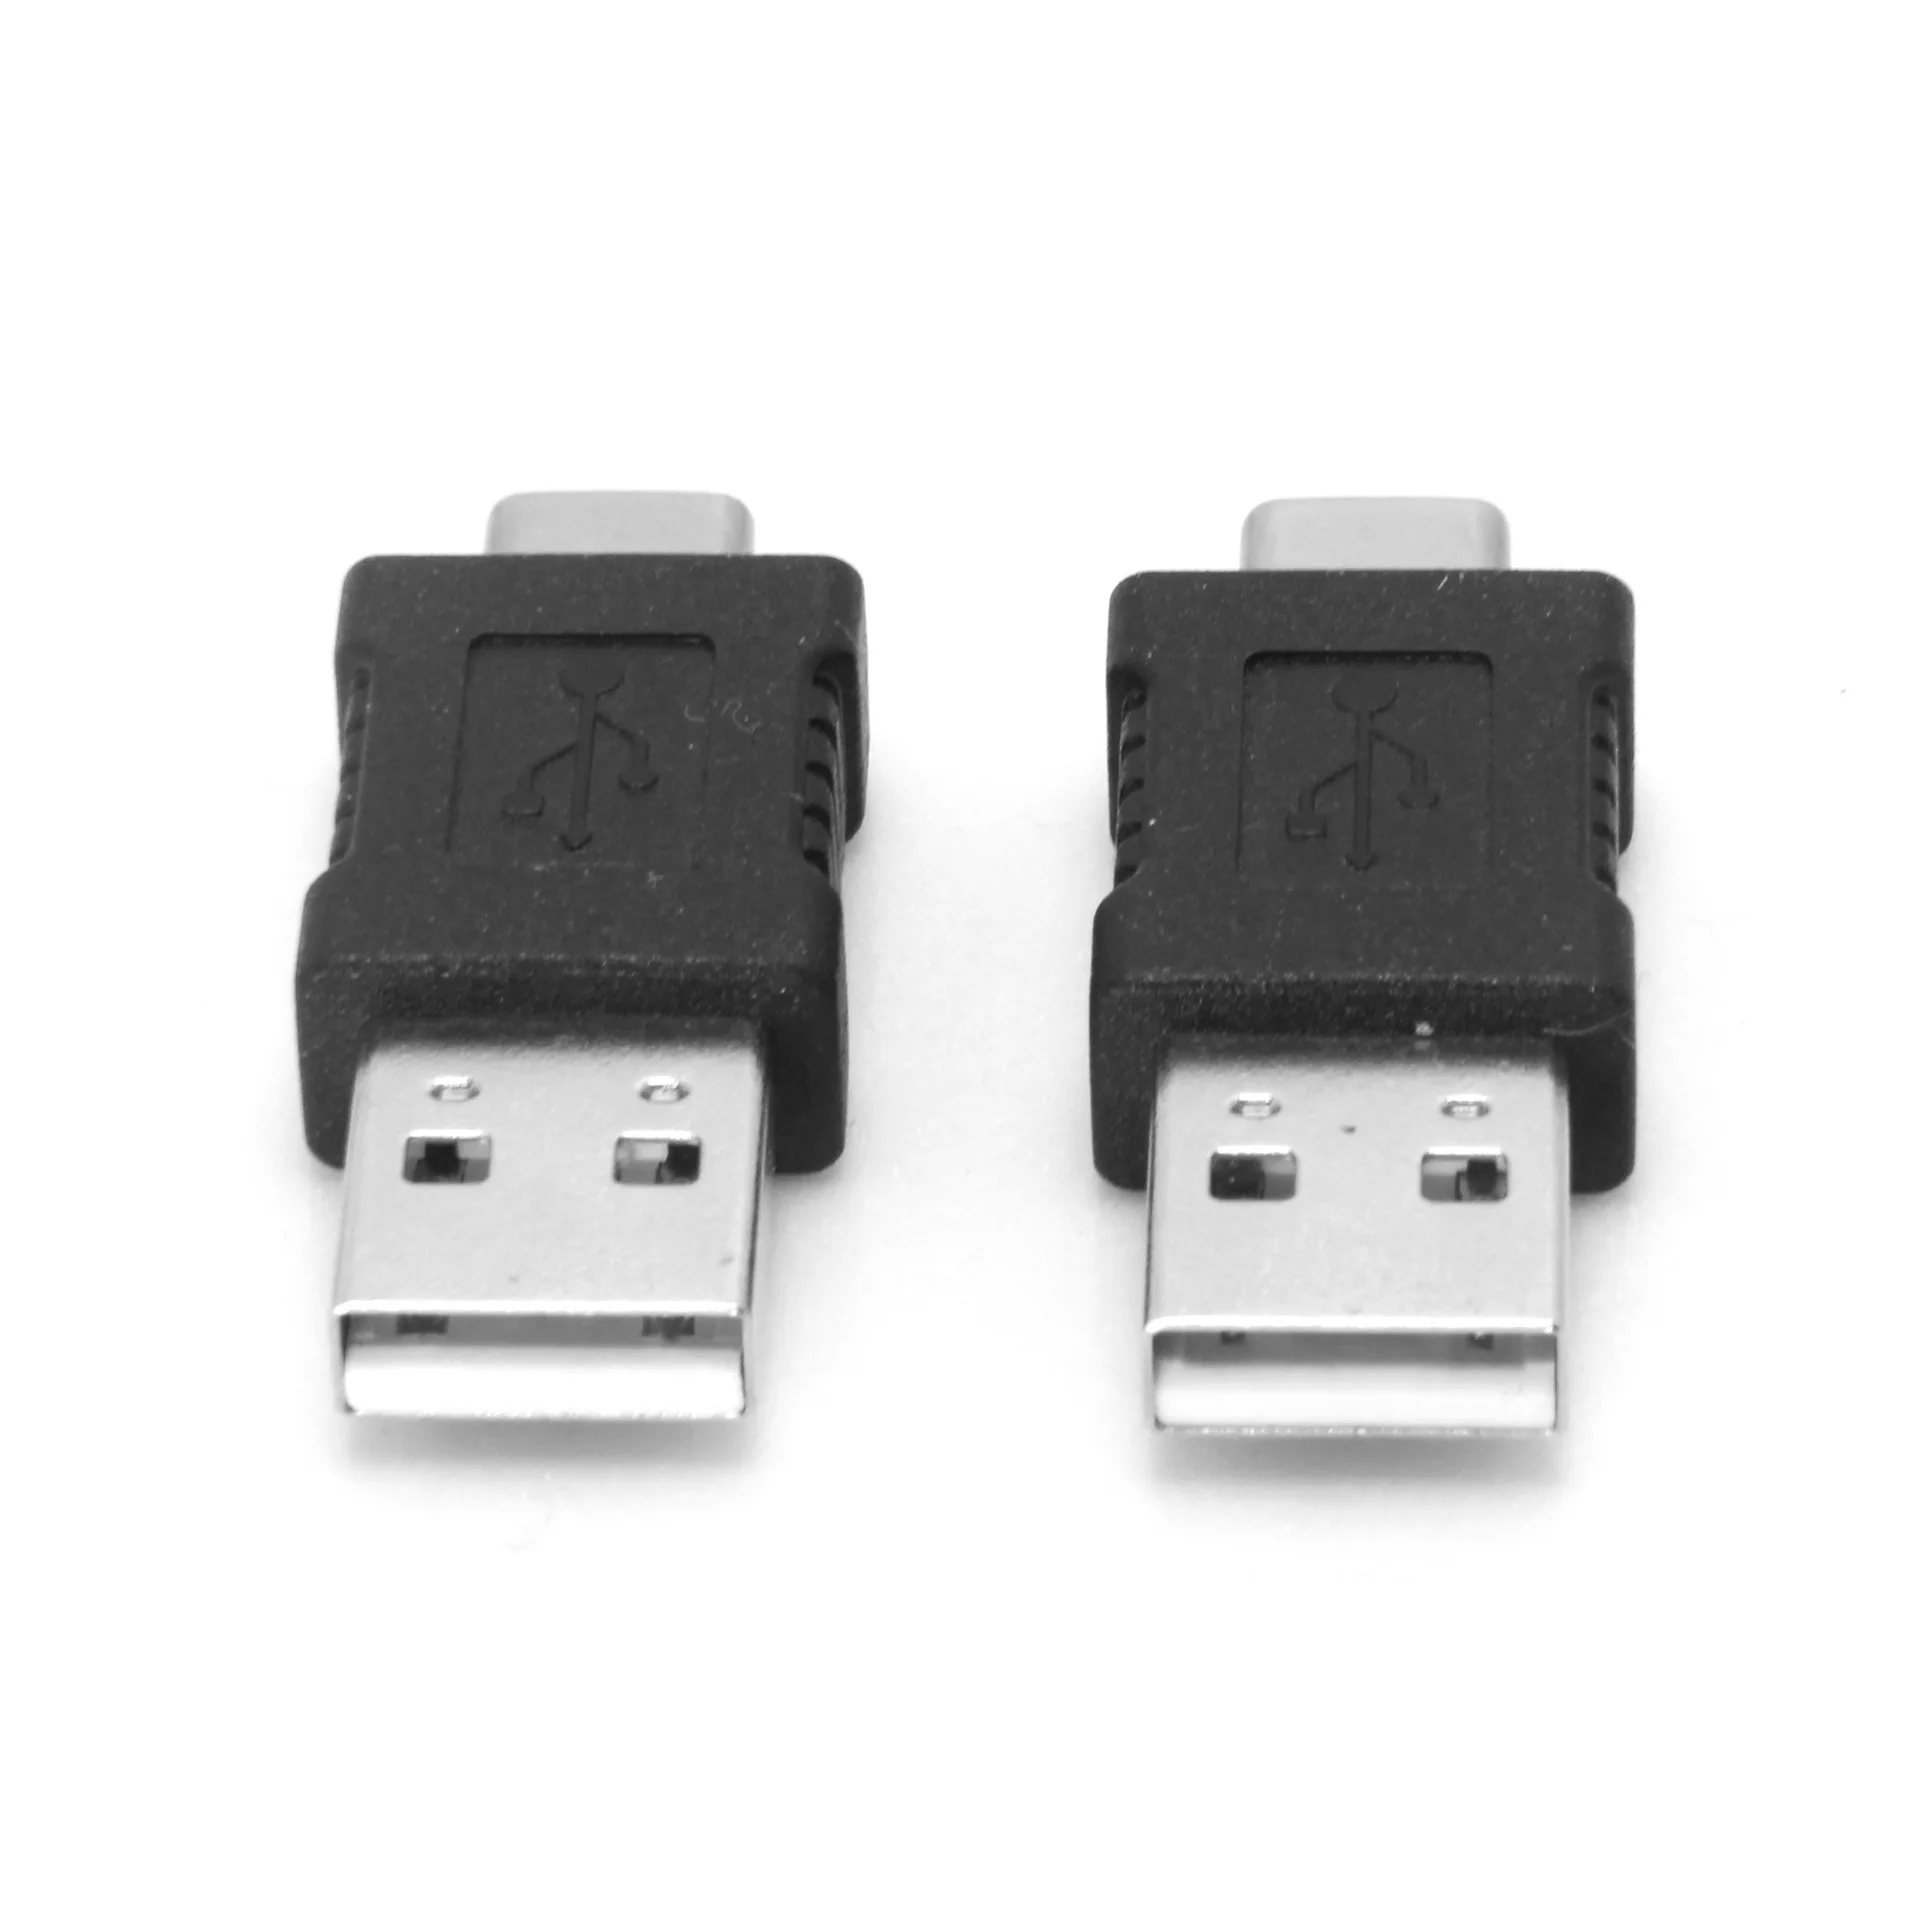 

cabletolink factory USB 2.0 A male to Type C male power charge data transfer adapter